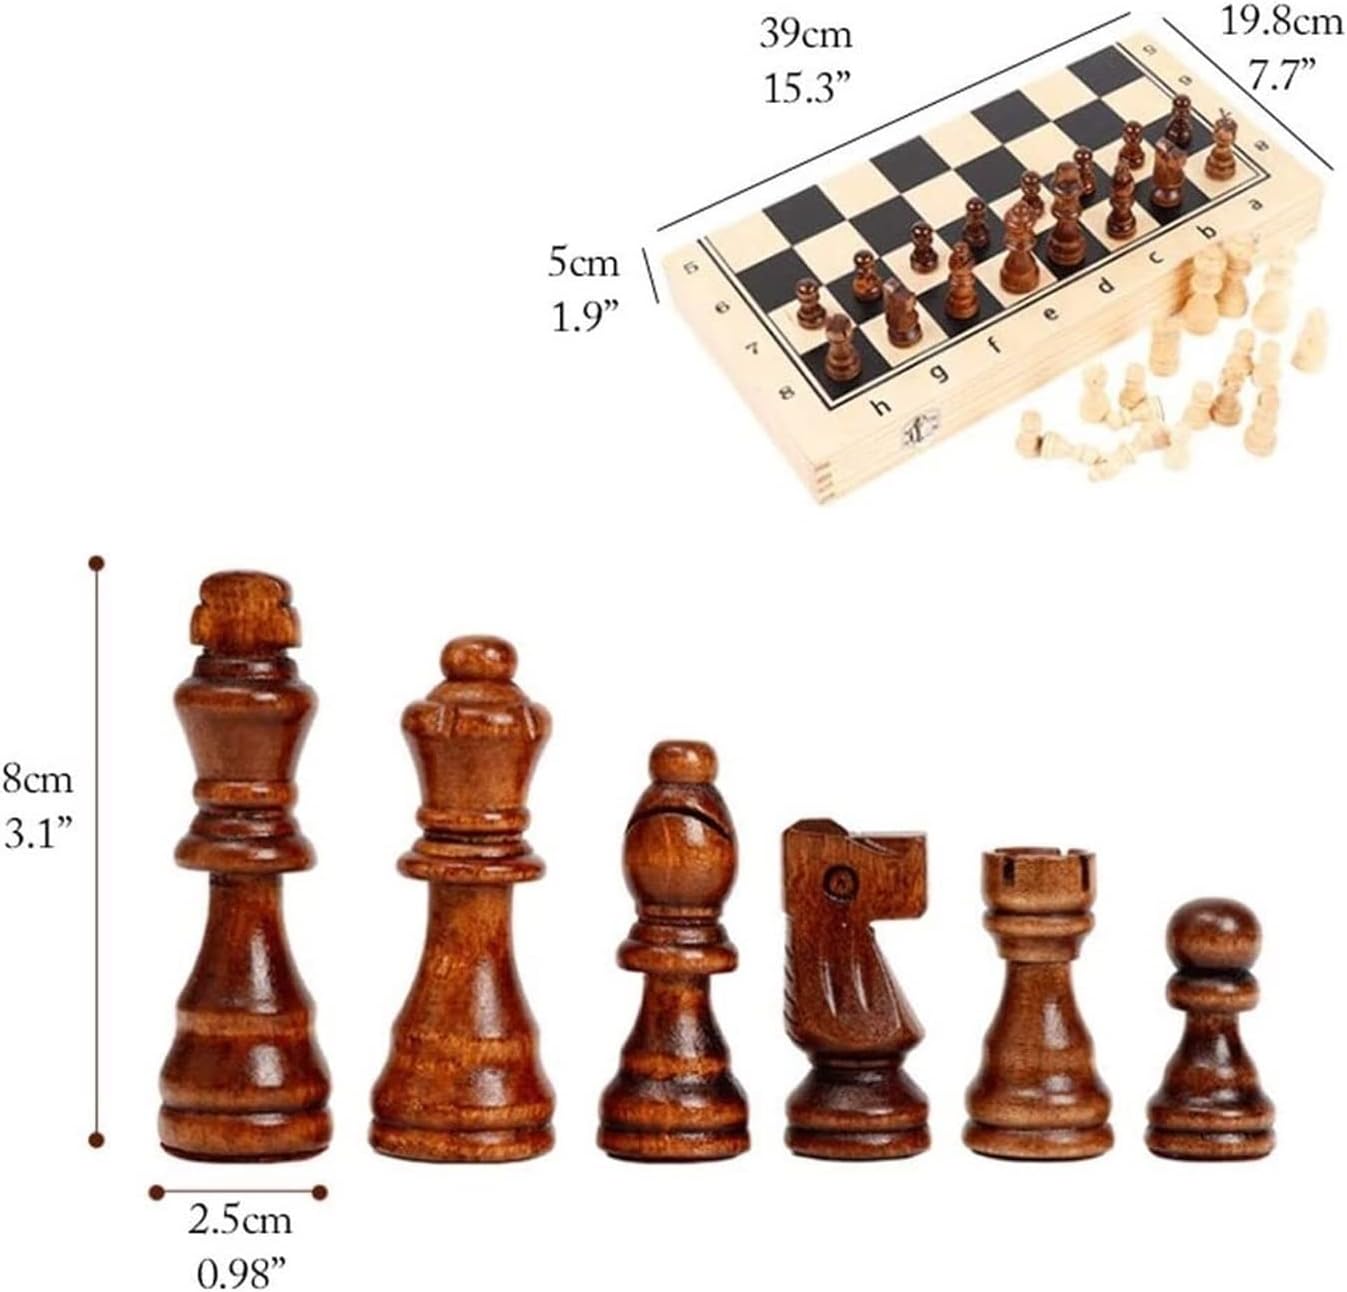 Chess Game Set Chess Set Chess Board Set Classic Chess Set 15" X 15"，Wooden Chess Set with Folding Chess Board, Chess Pieces Storage Box Chess Board Game Chess Game